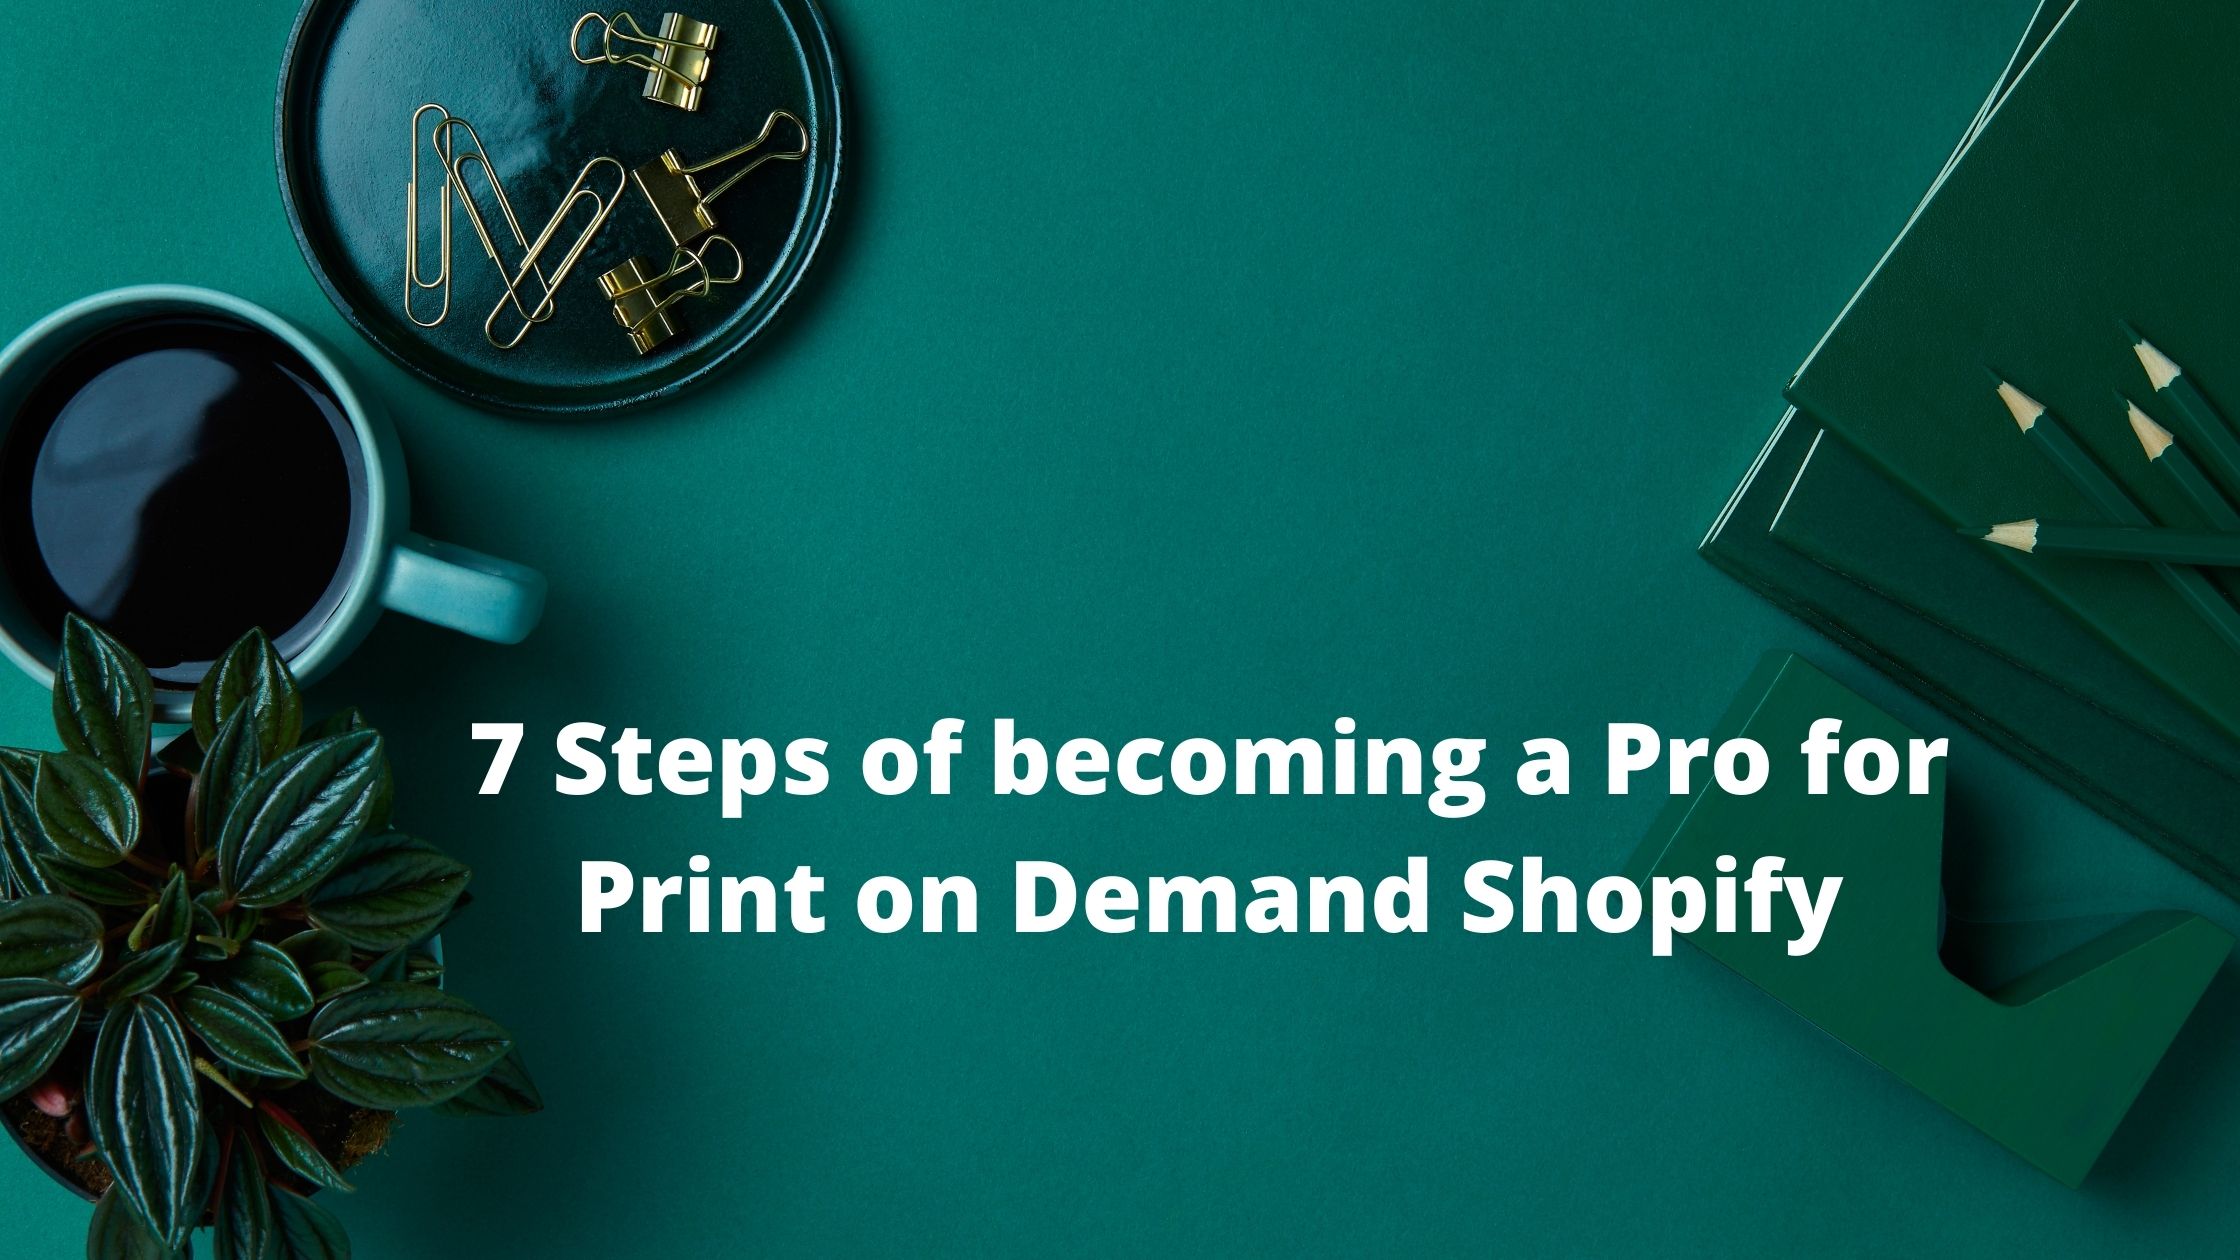 7 Steps of becoming a Pro for Print on Demand Shopify.jpg